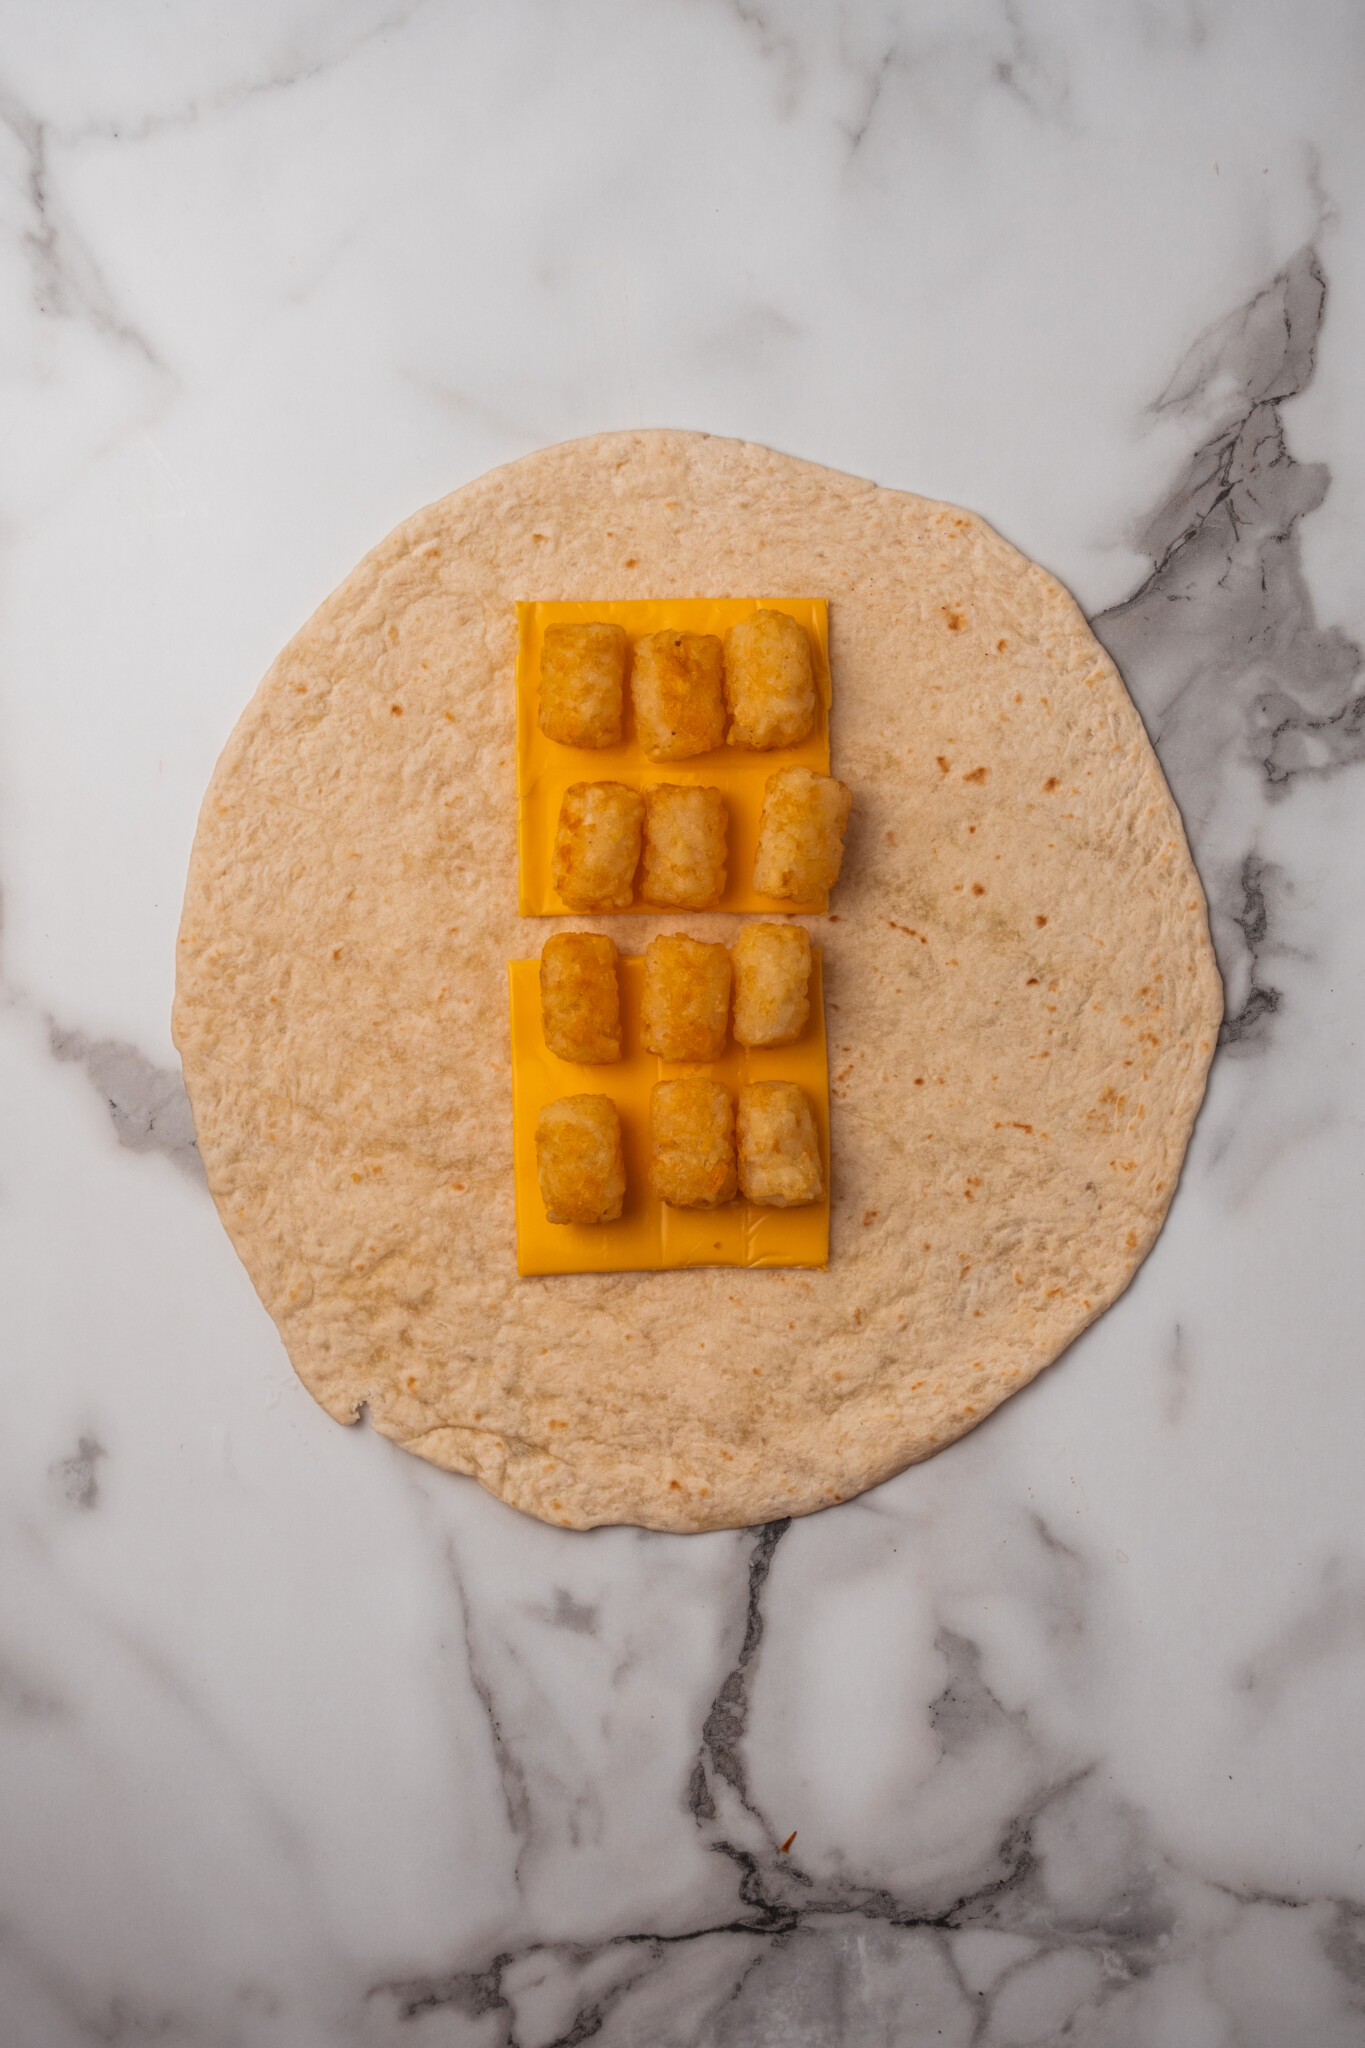 adding tater tots on top of the cheese on the tortilla